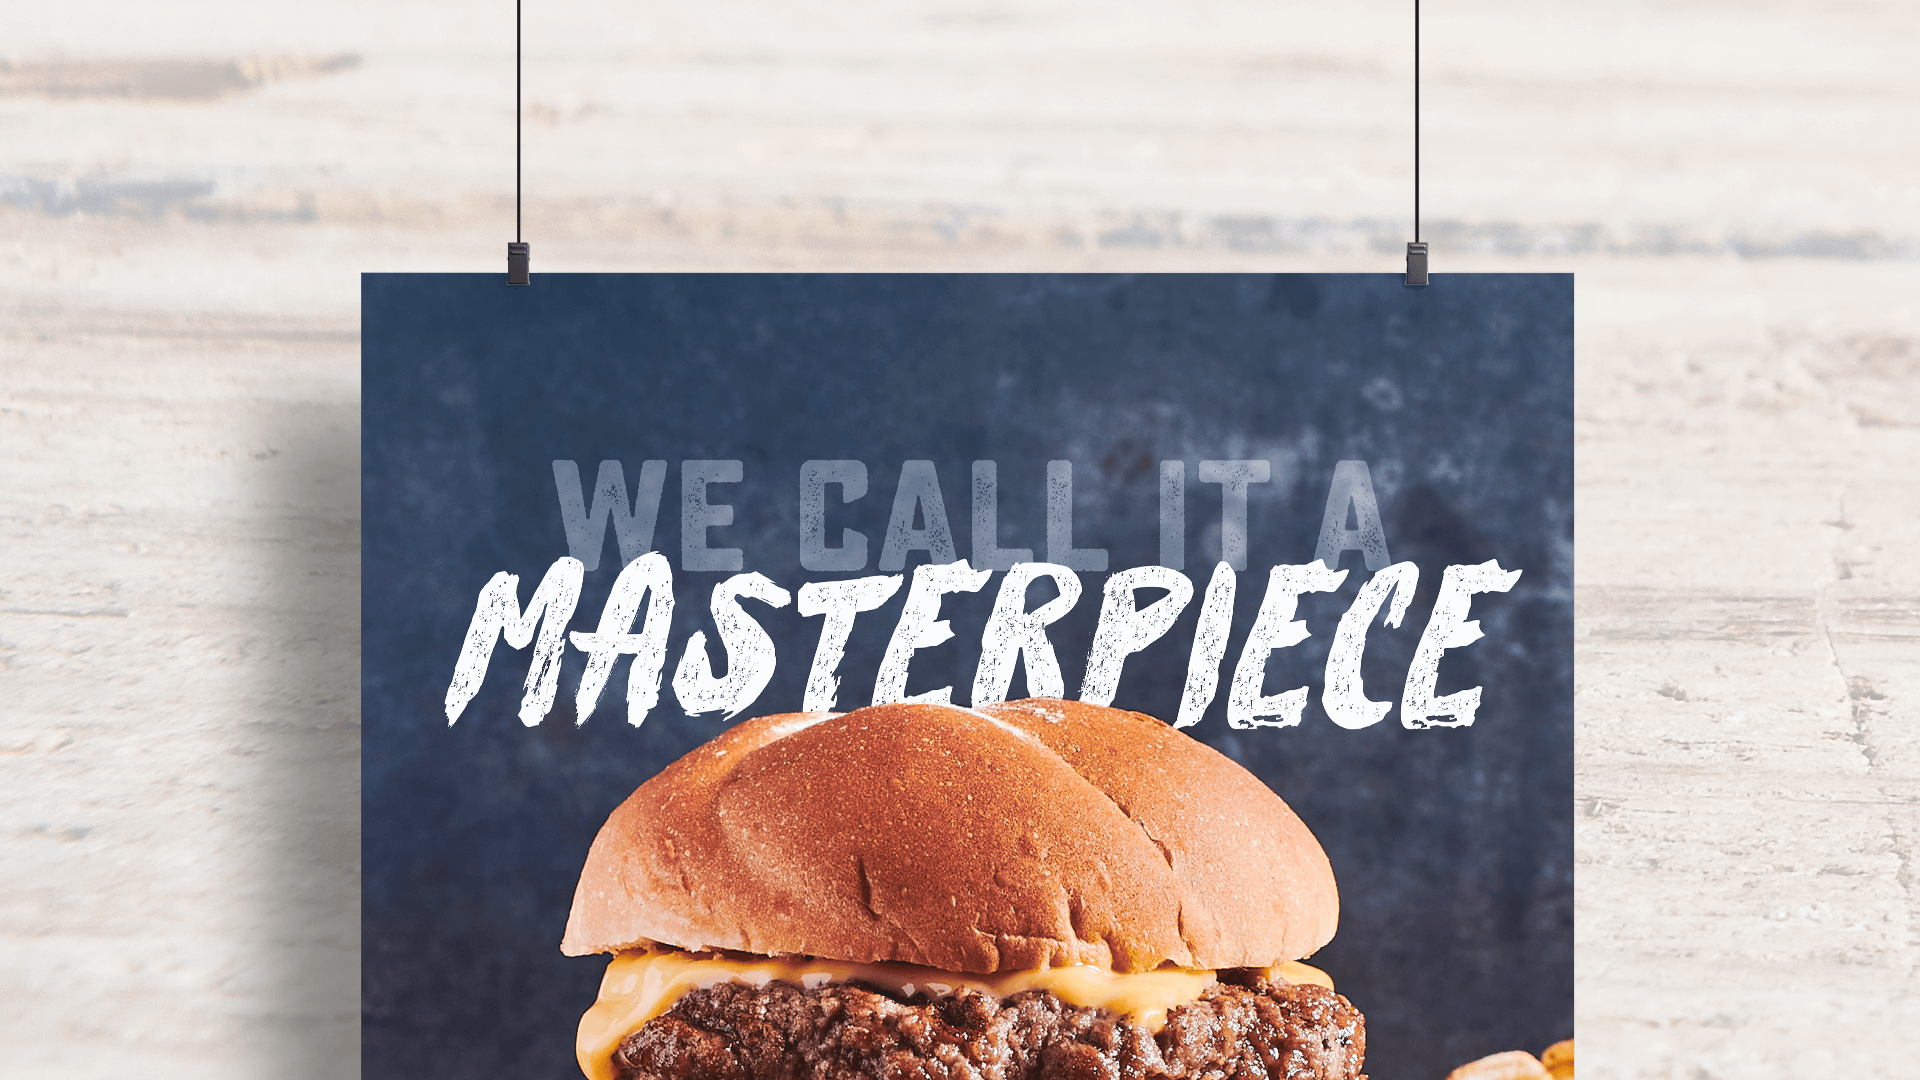 Poster with text that readys "We call it a masterpiece" and a burger image